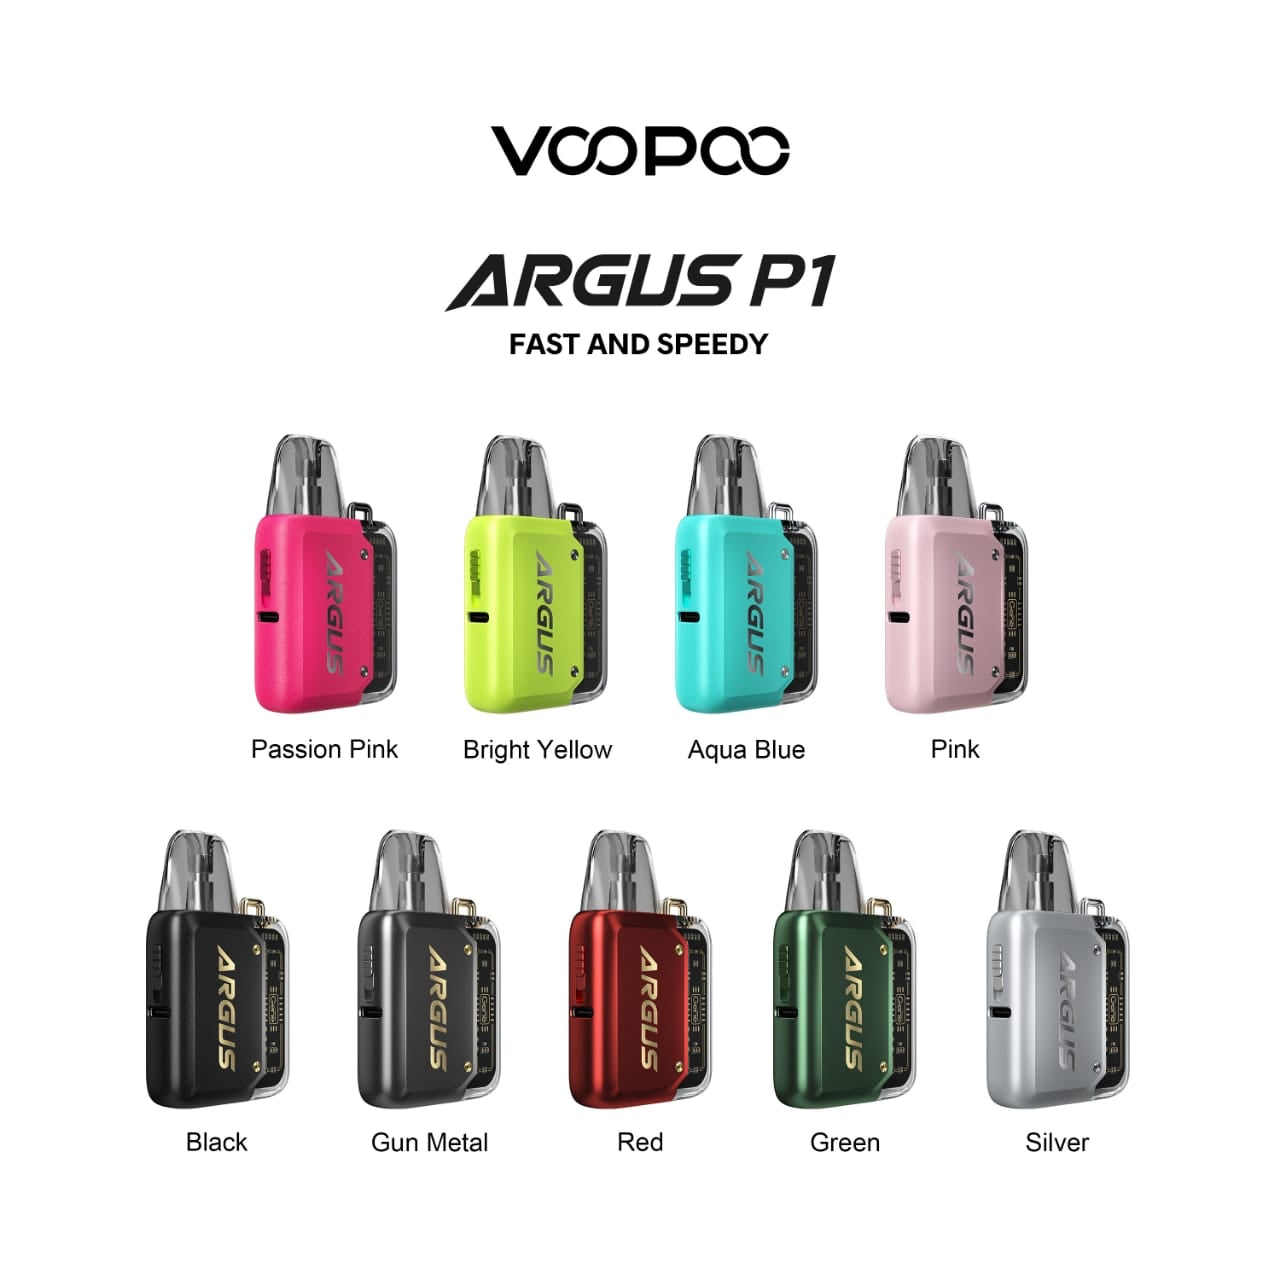 Voopoo Argus p1 fast and speedy